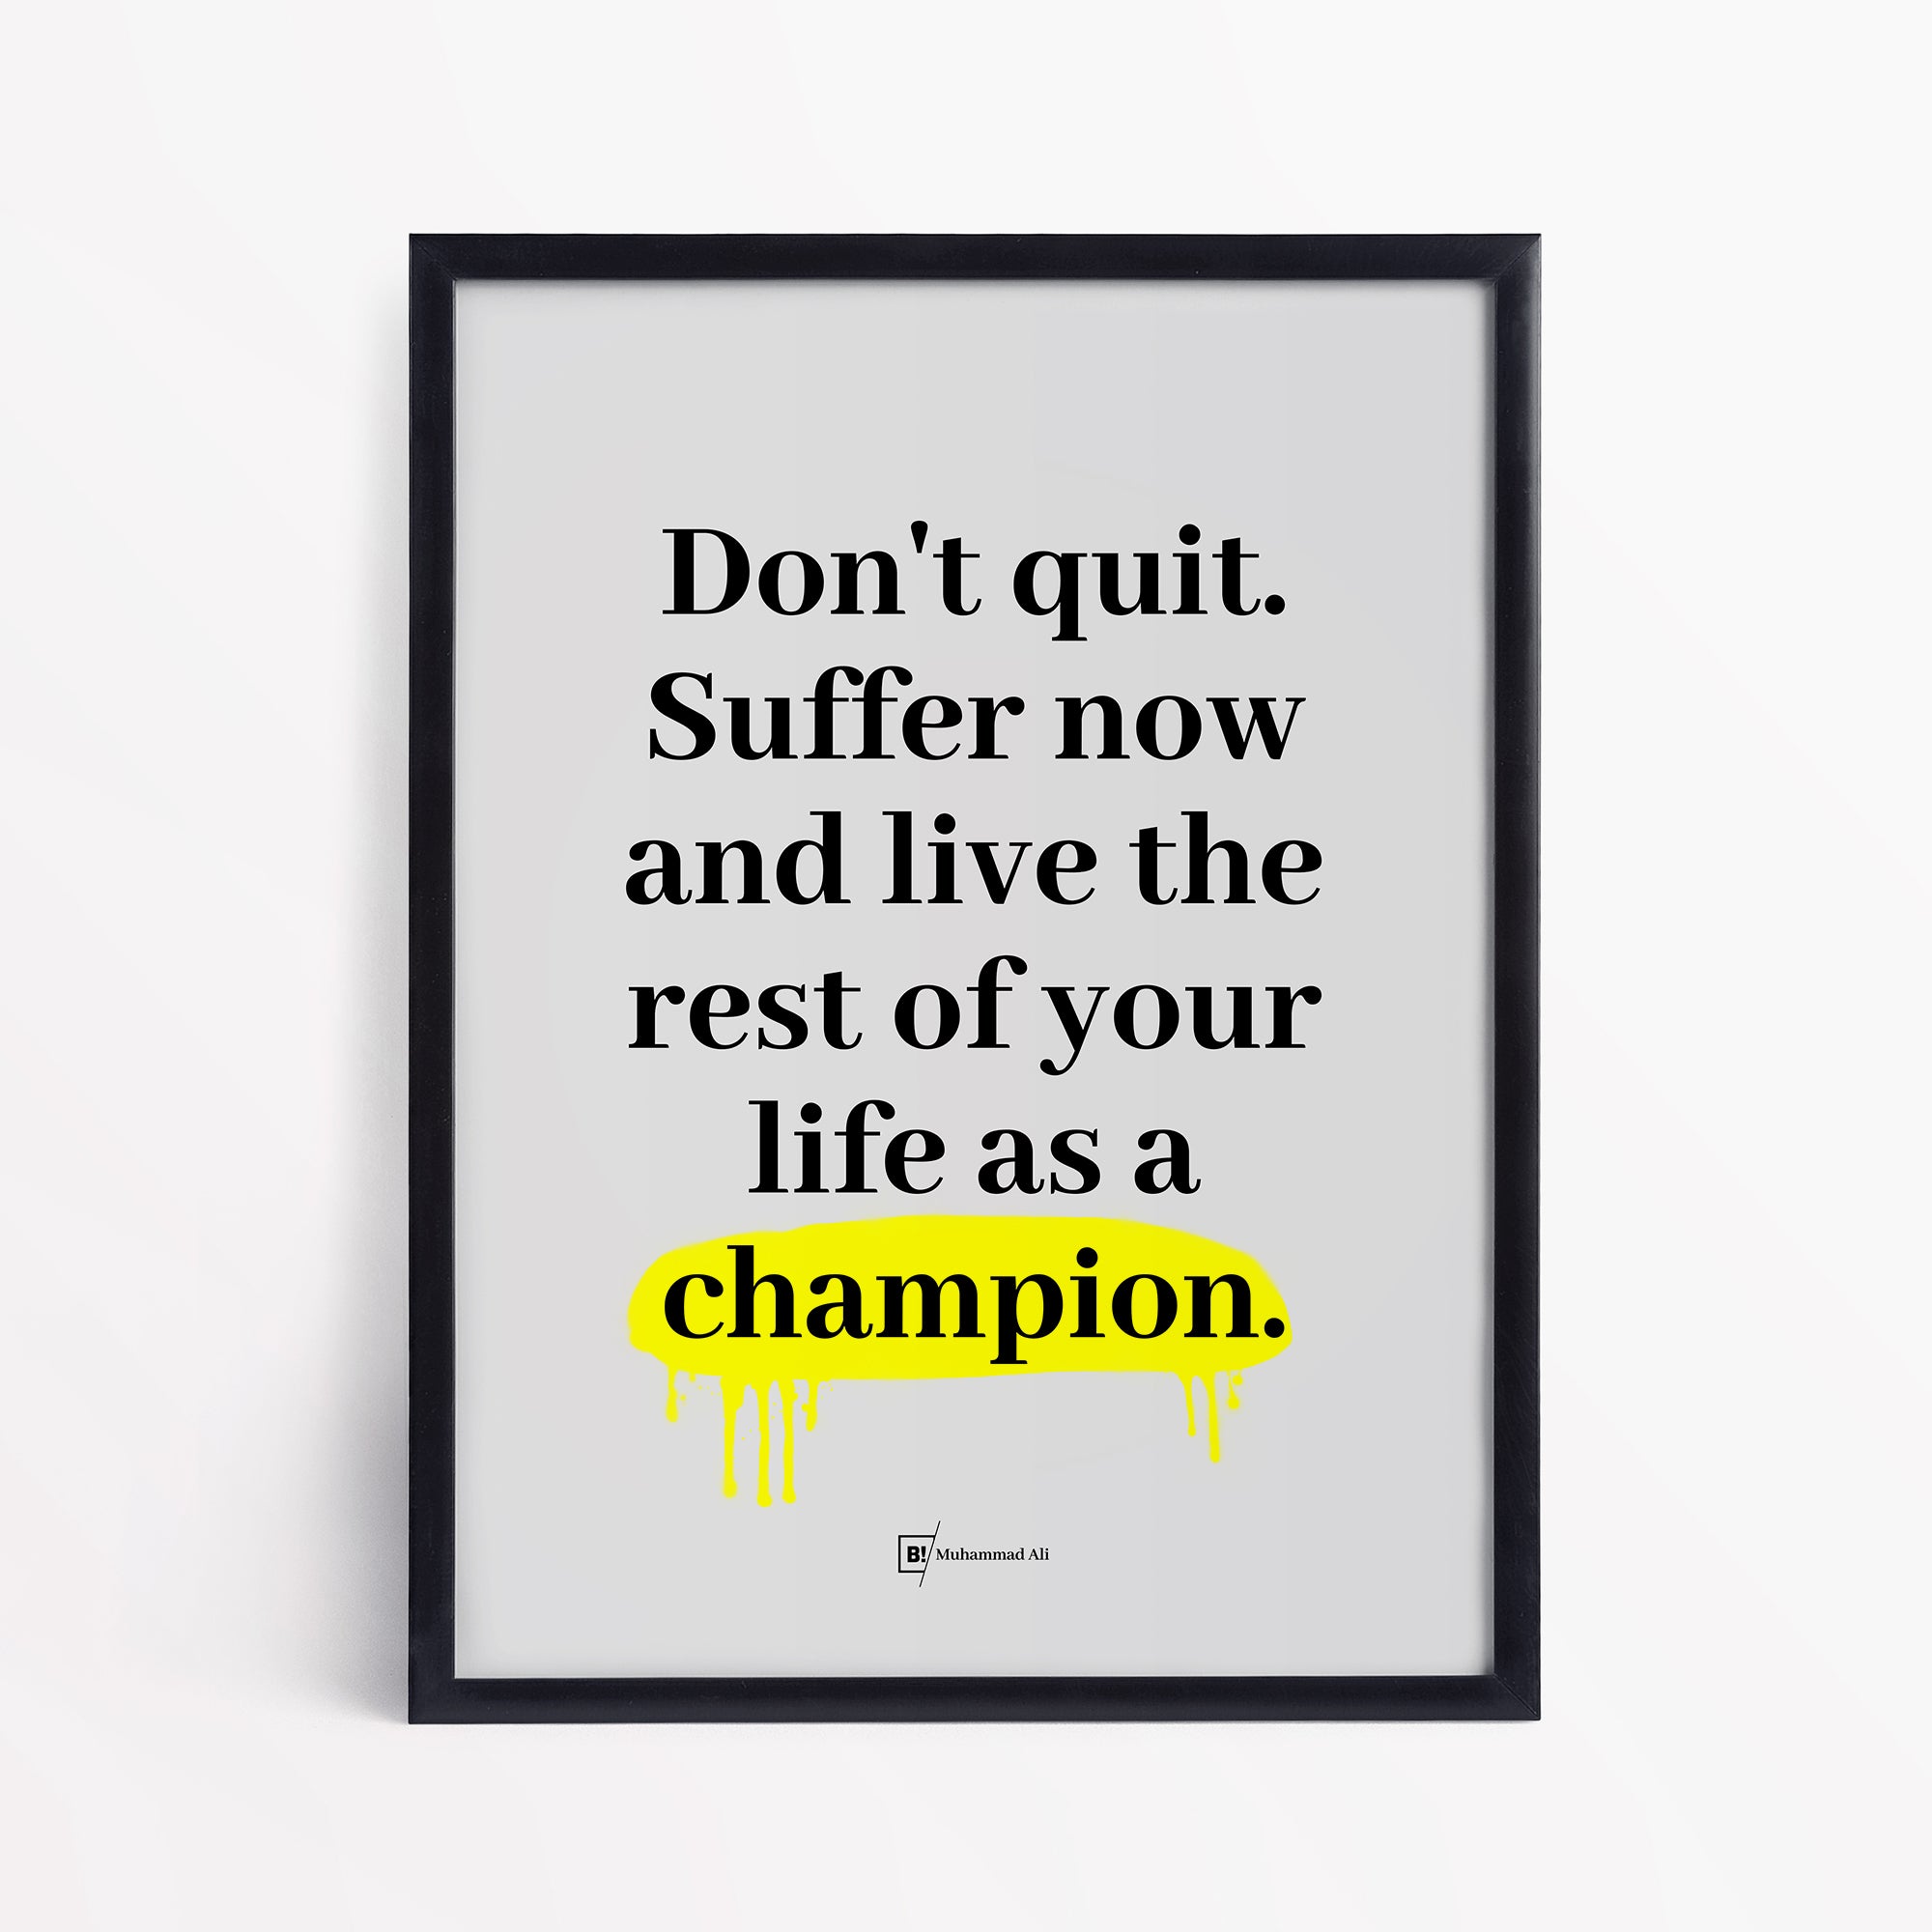 Be inspired by Muhammad Ali's famous "Don't quit. Suffer now and live the rest of your life as a champion" quote art print. This artwork was printed using the giclée process on archival acid-free paper and is presented in a simple black frame that captures its timeless beauty in every detail.